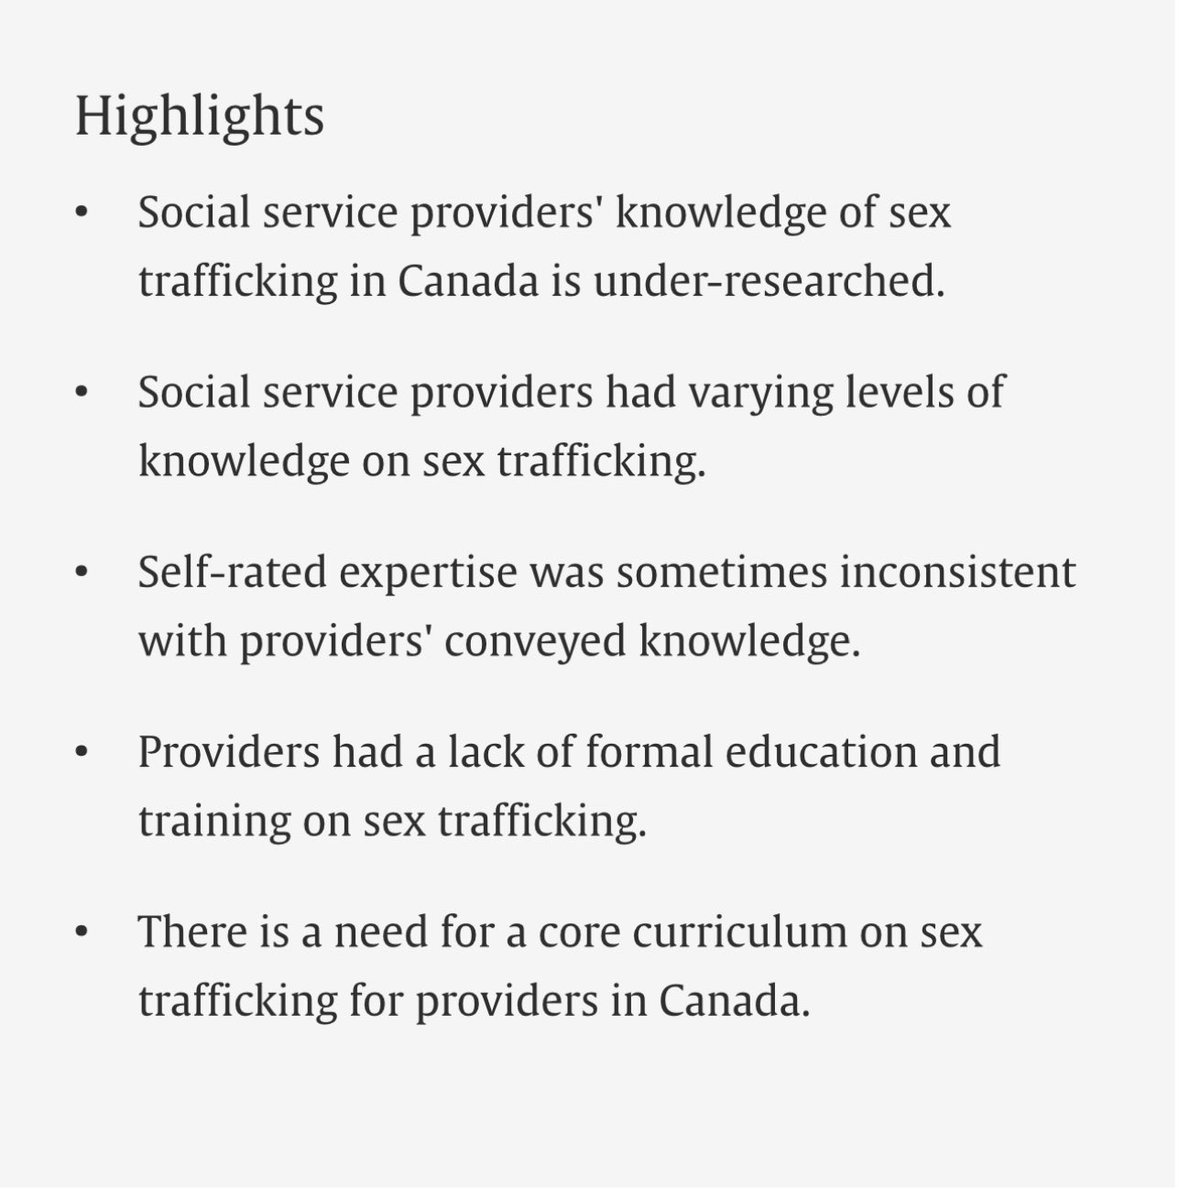 #NEWPUB from our team
'Social service providers' knowledge of domestic sex trafficking in the Canadian Context' led by @DaniJacobson #SexTrafficking
@WCHospital @WCHResearch @wchf @UofT_dlsph @FranMontemurro @RealRhonelle 
sciencedirect.com/science/articl…